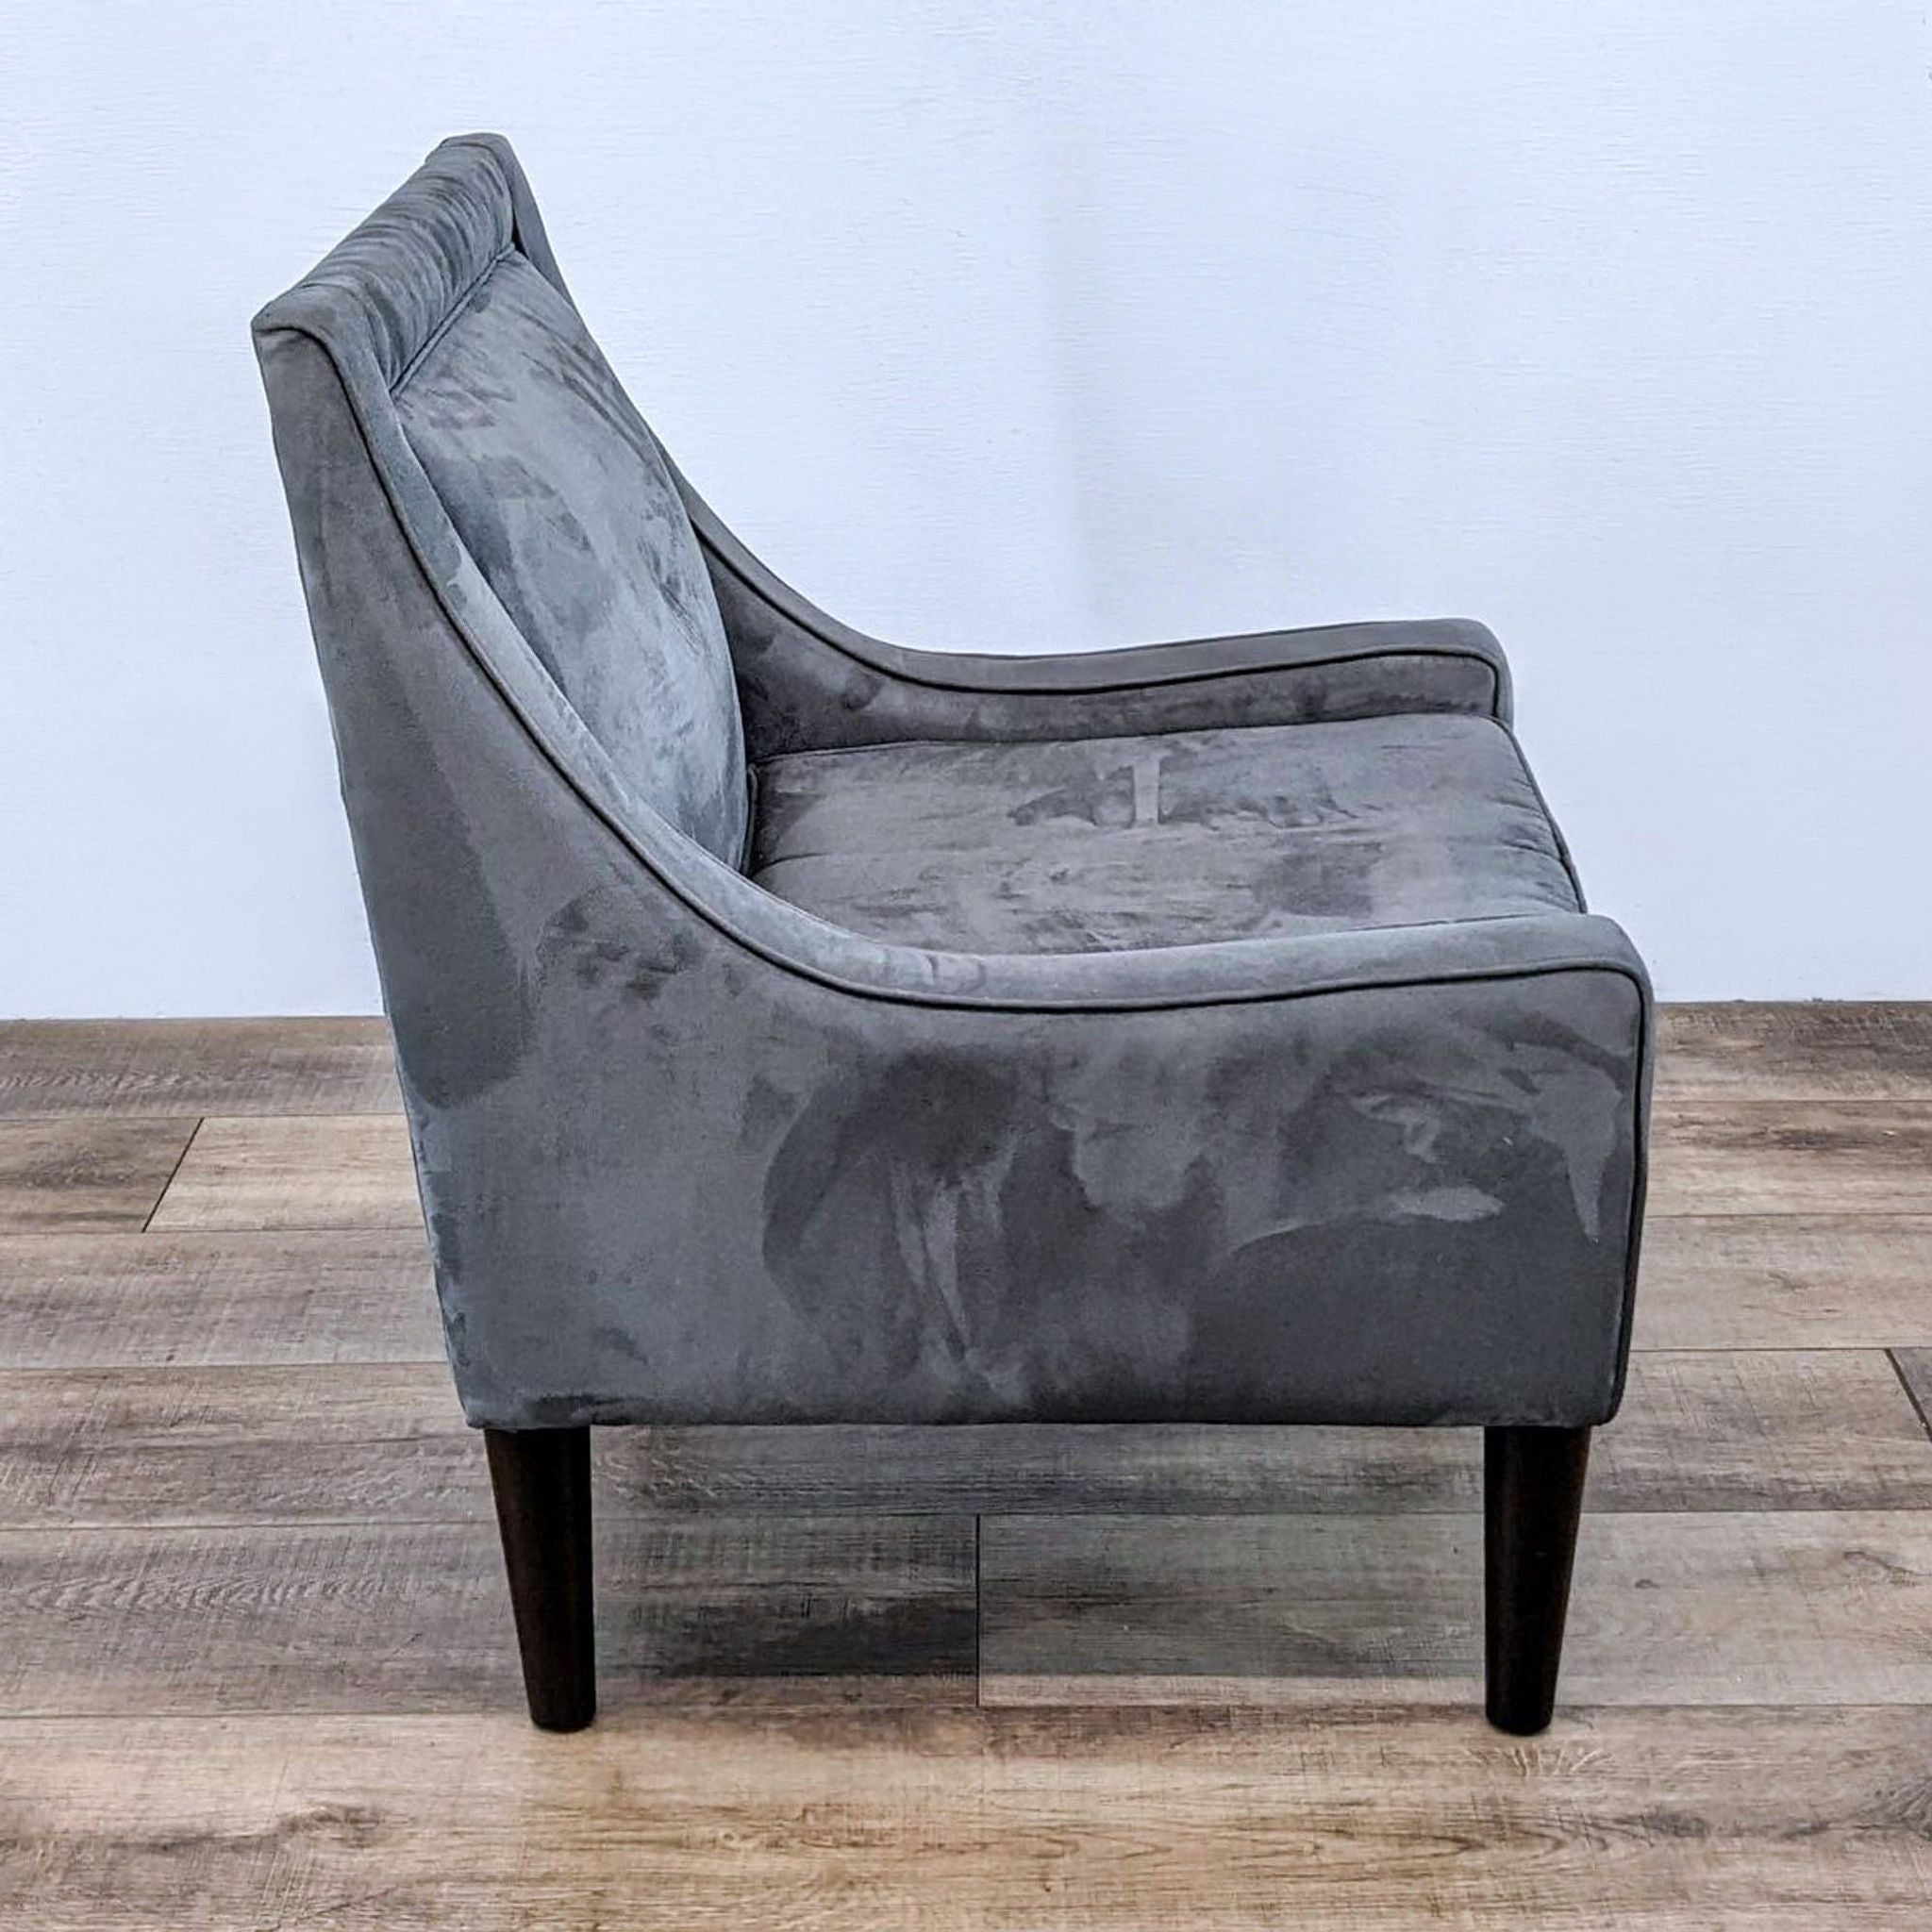 Pair of gray lounge armchairs by Skyline Furniture with elegant narrow arms, comfortable cushioning, and dark tapered legs.